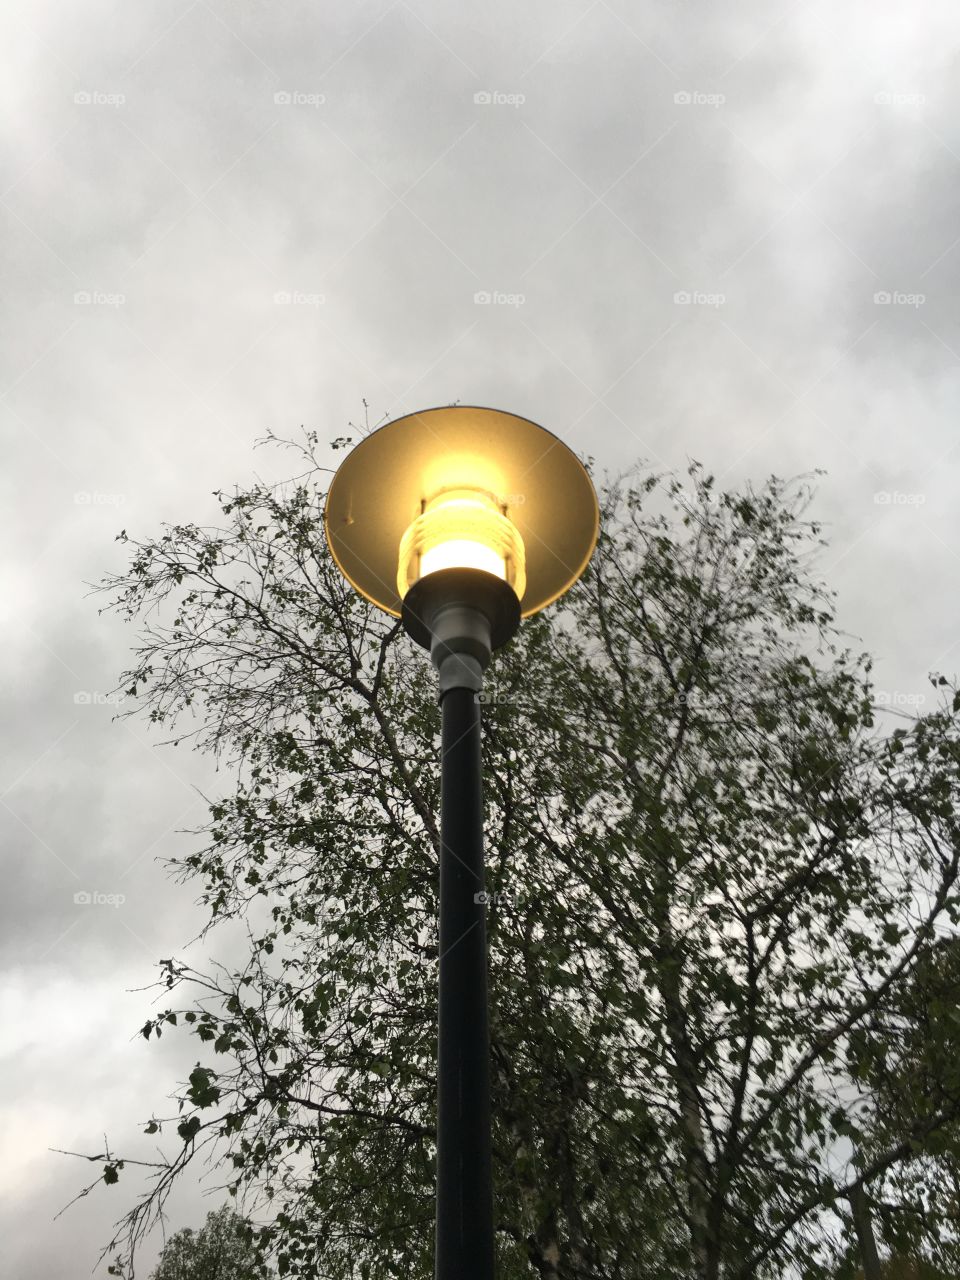 Public lighting with style